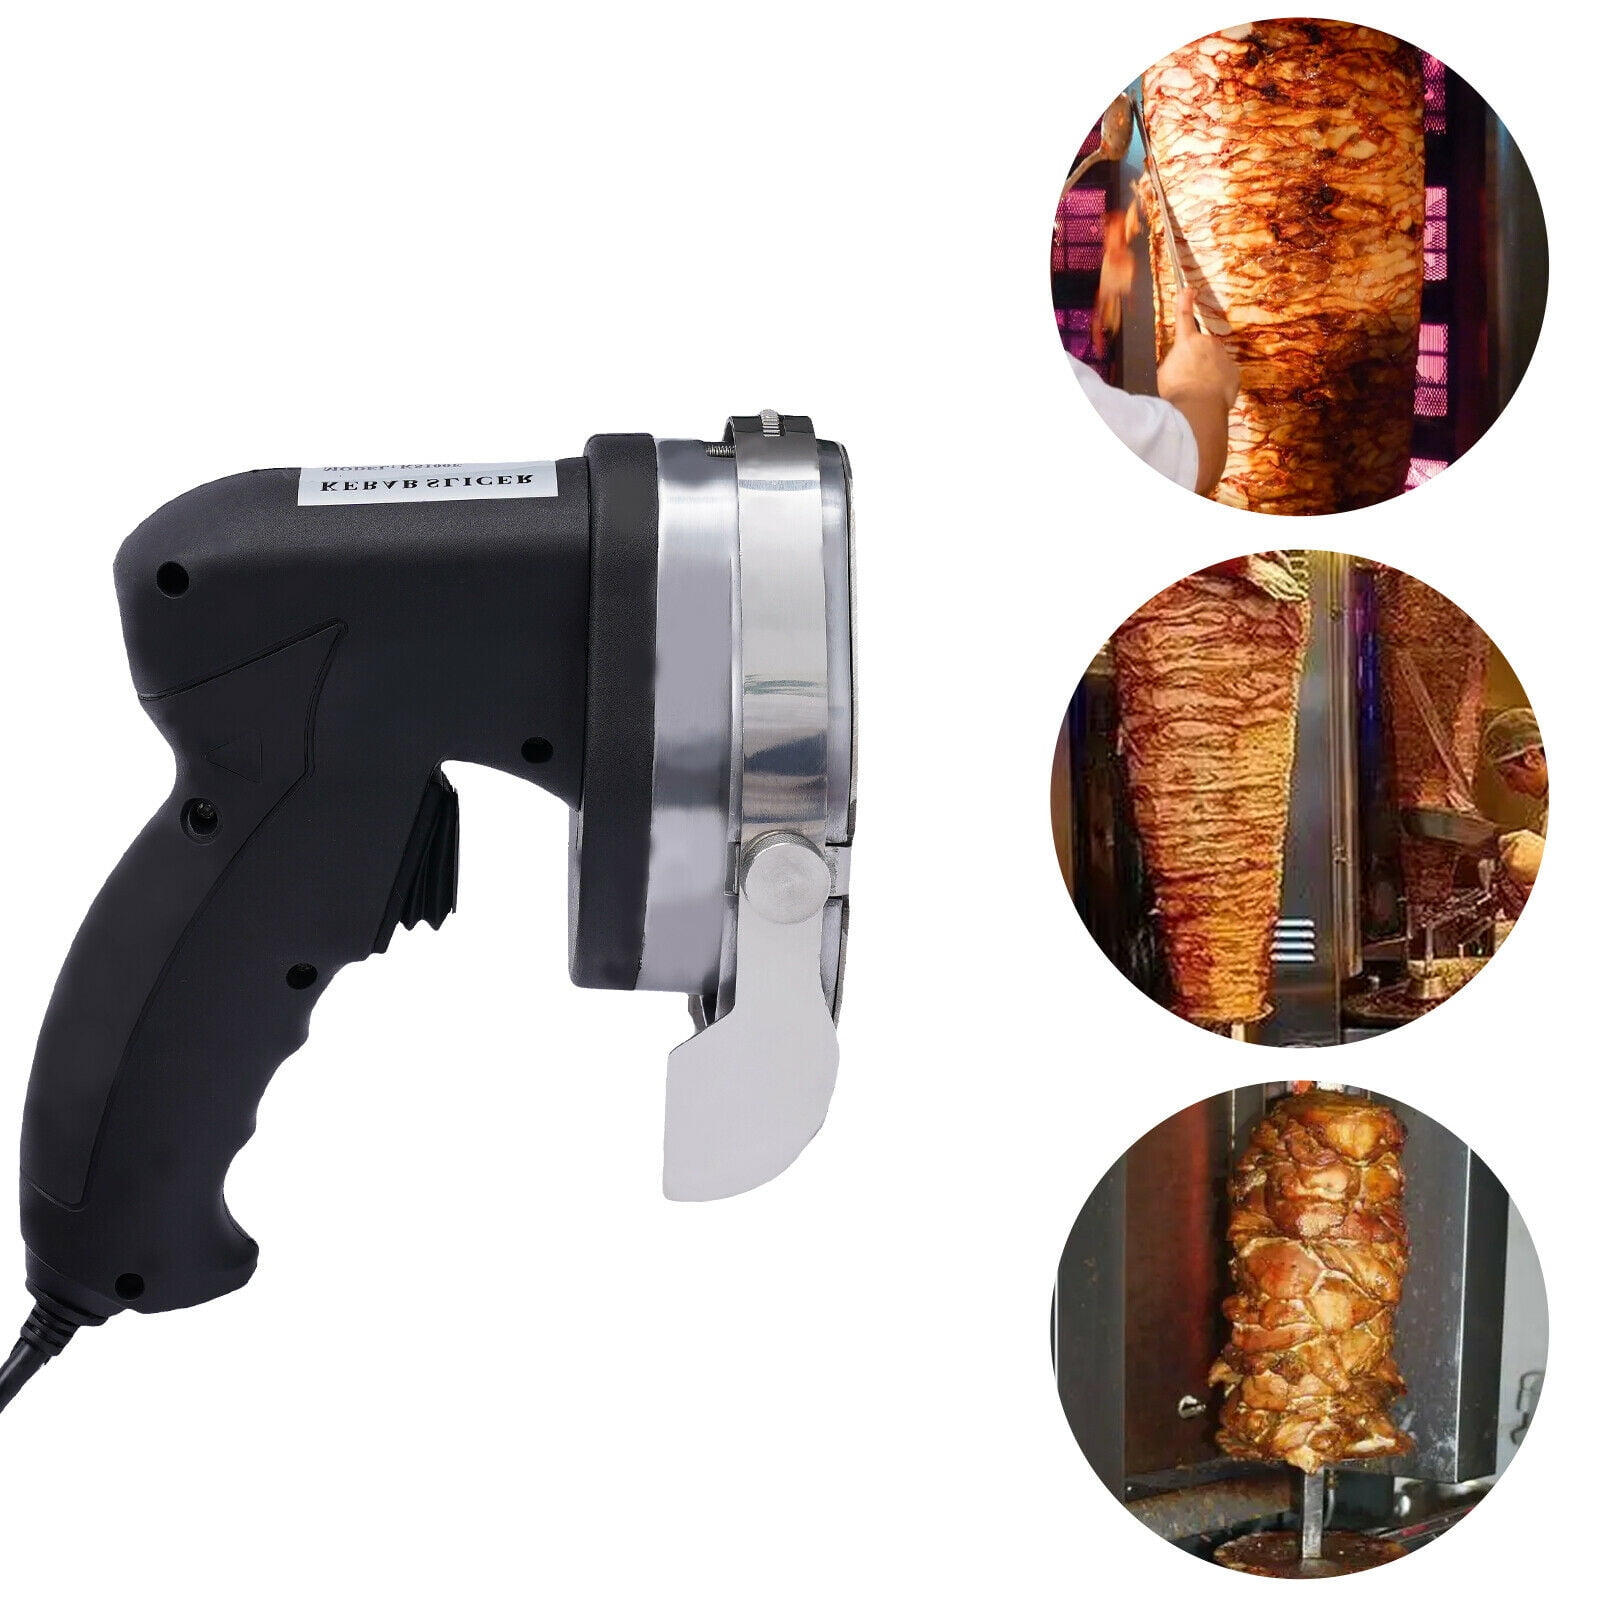  Gyro Knife Electric Kebab Slicer, Stainless Steel Commercial  Shawarma Meat Cutter, Type Gyro Cutter Kebab Slicer Sliced Meat Gyros Knife,  Adjustable Thickness 0 to 8 mm,Black (Red): Home & Kitchen